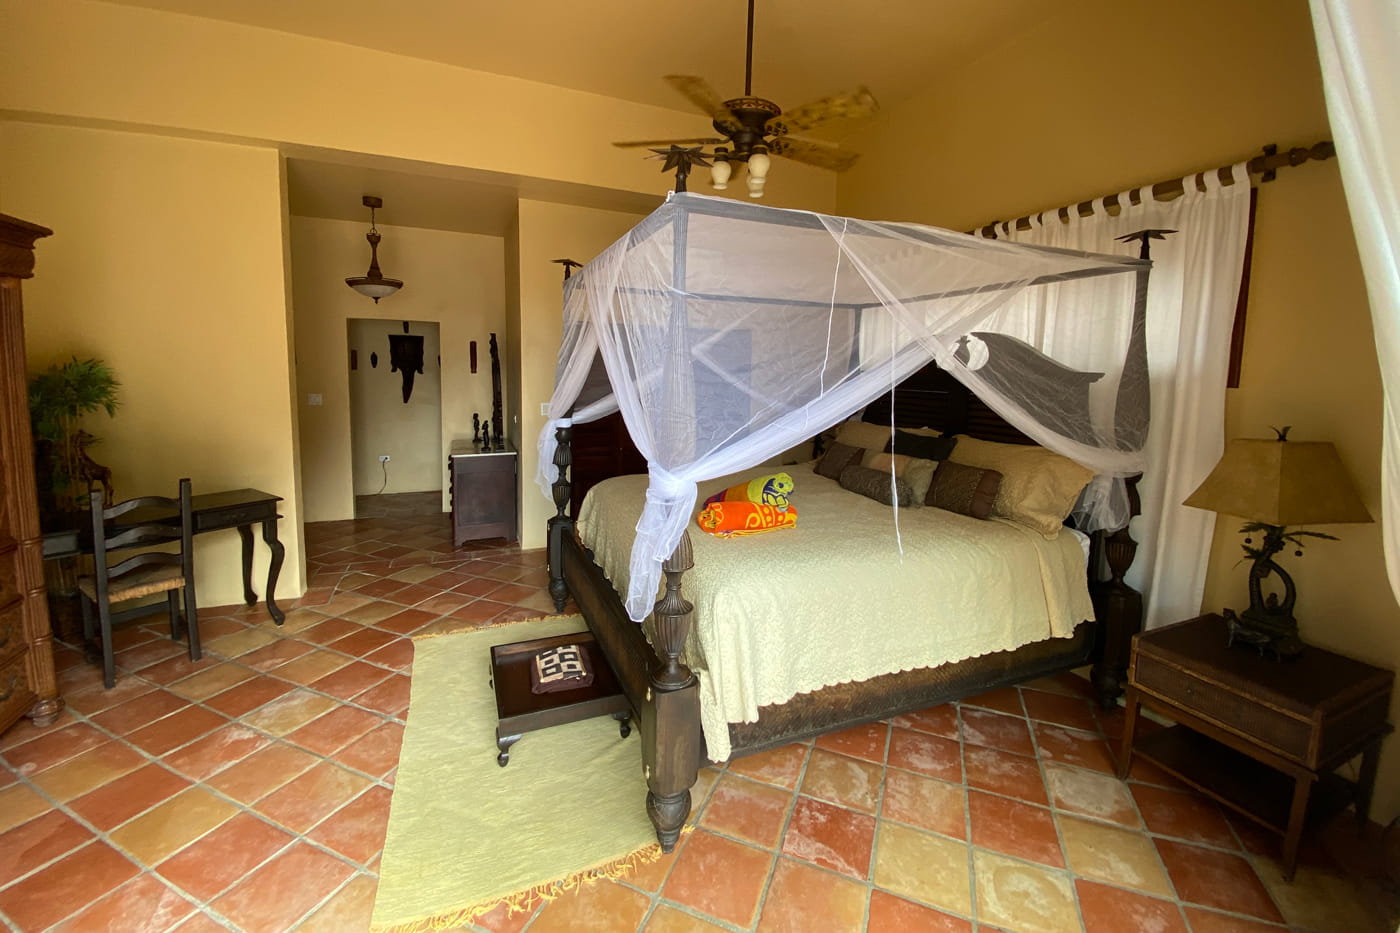 Serengeti Room (25' x 18'), with extra king size bed in alcove and with full bathroom